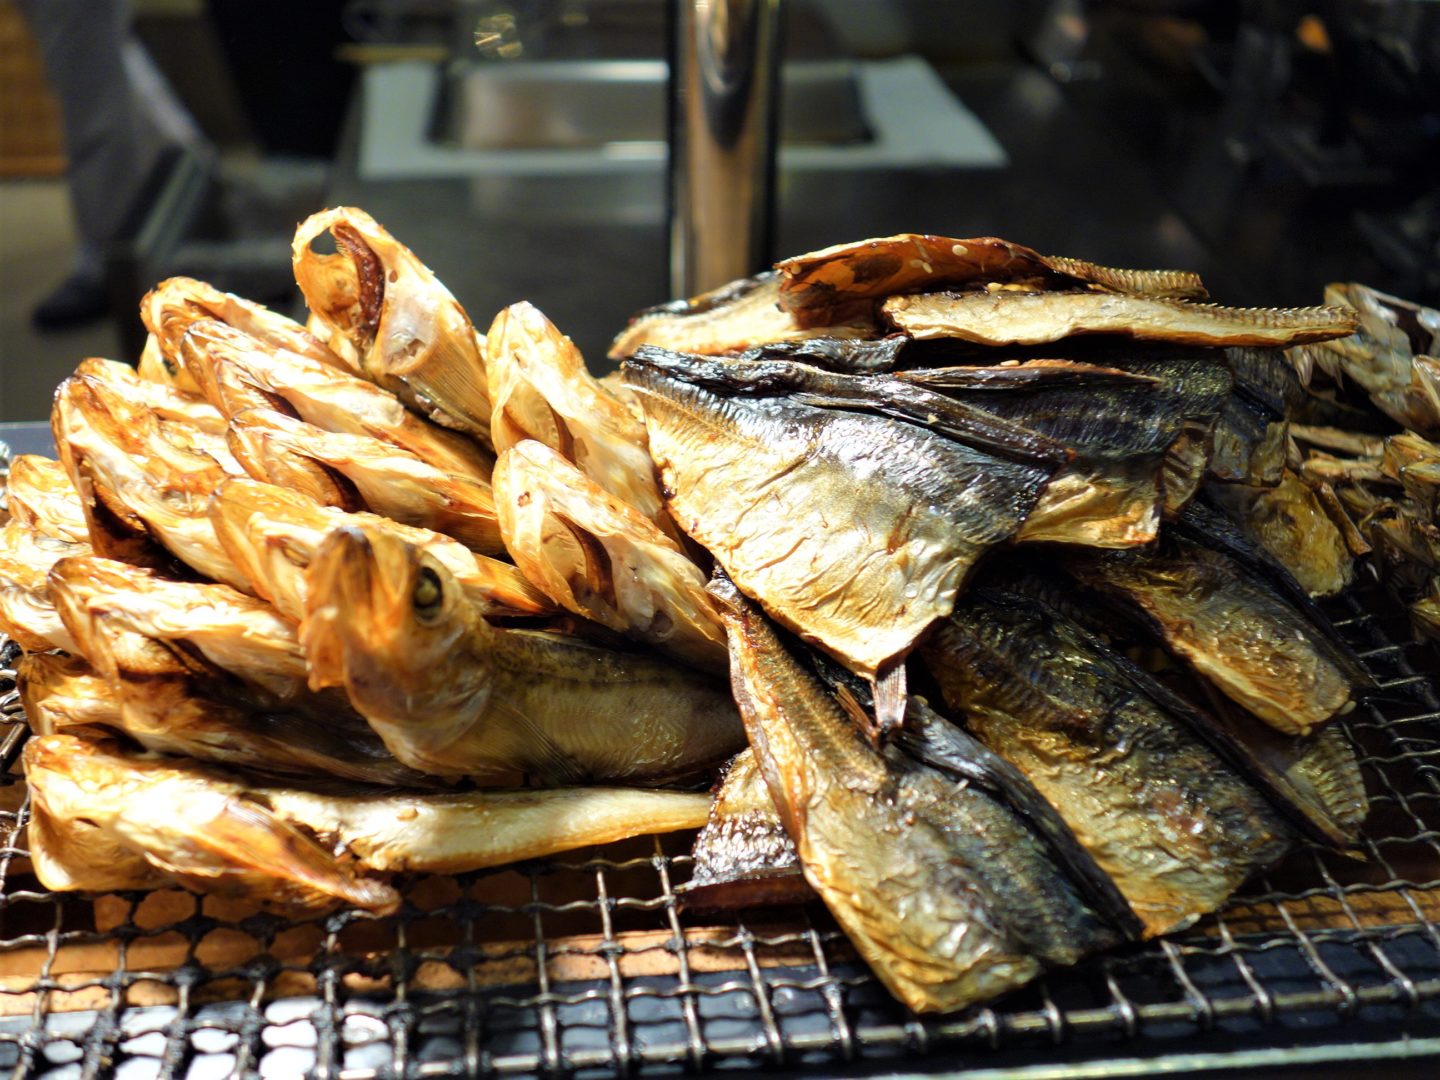 Dried fish served at breakfast